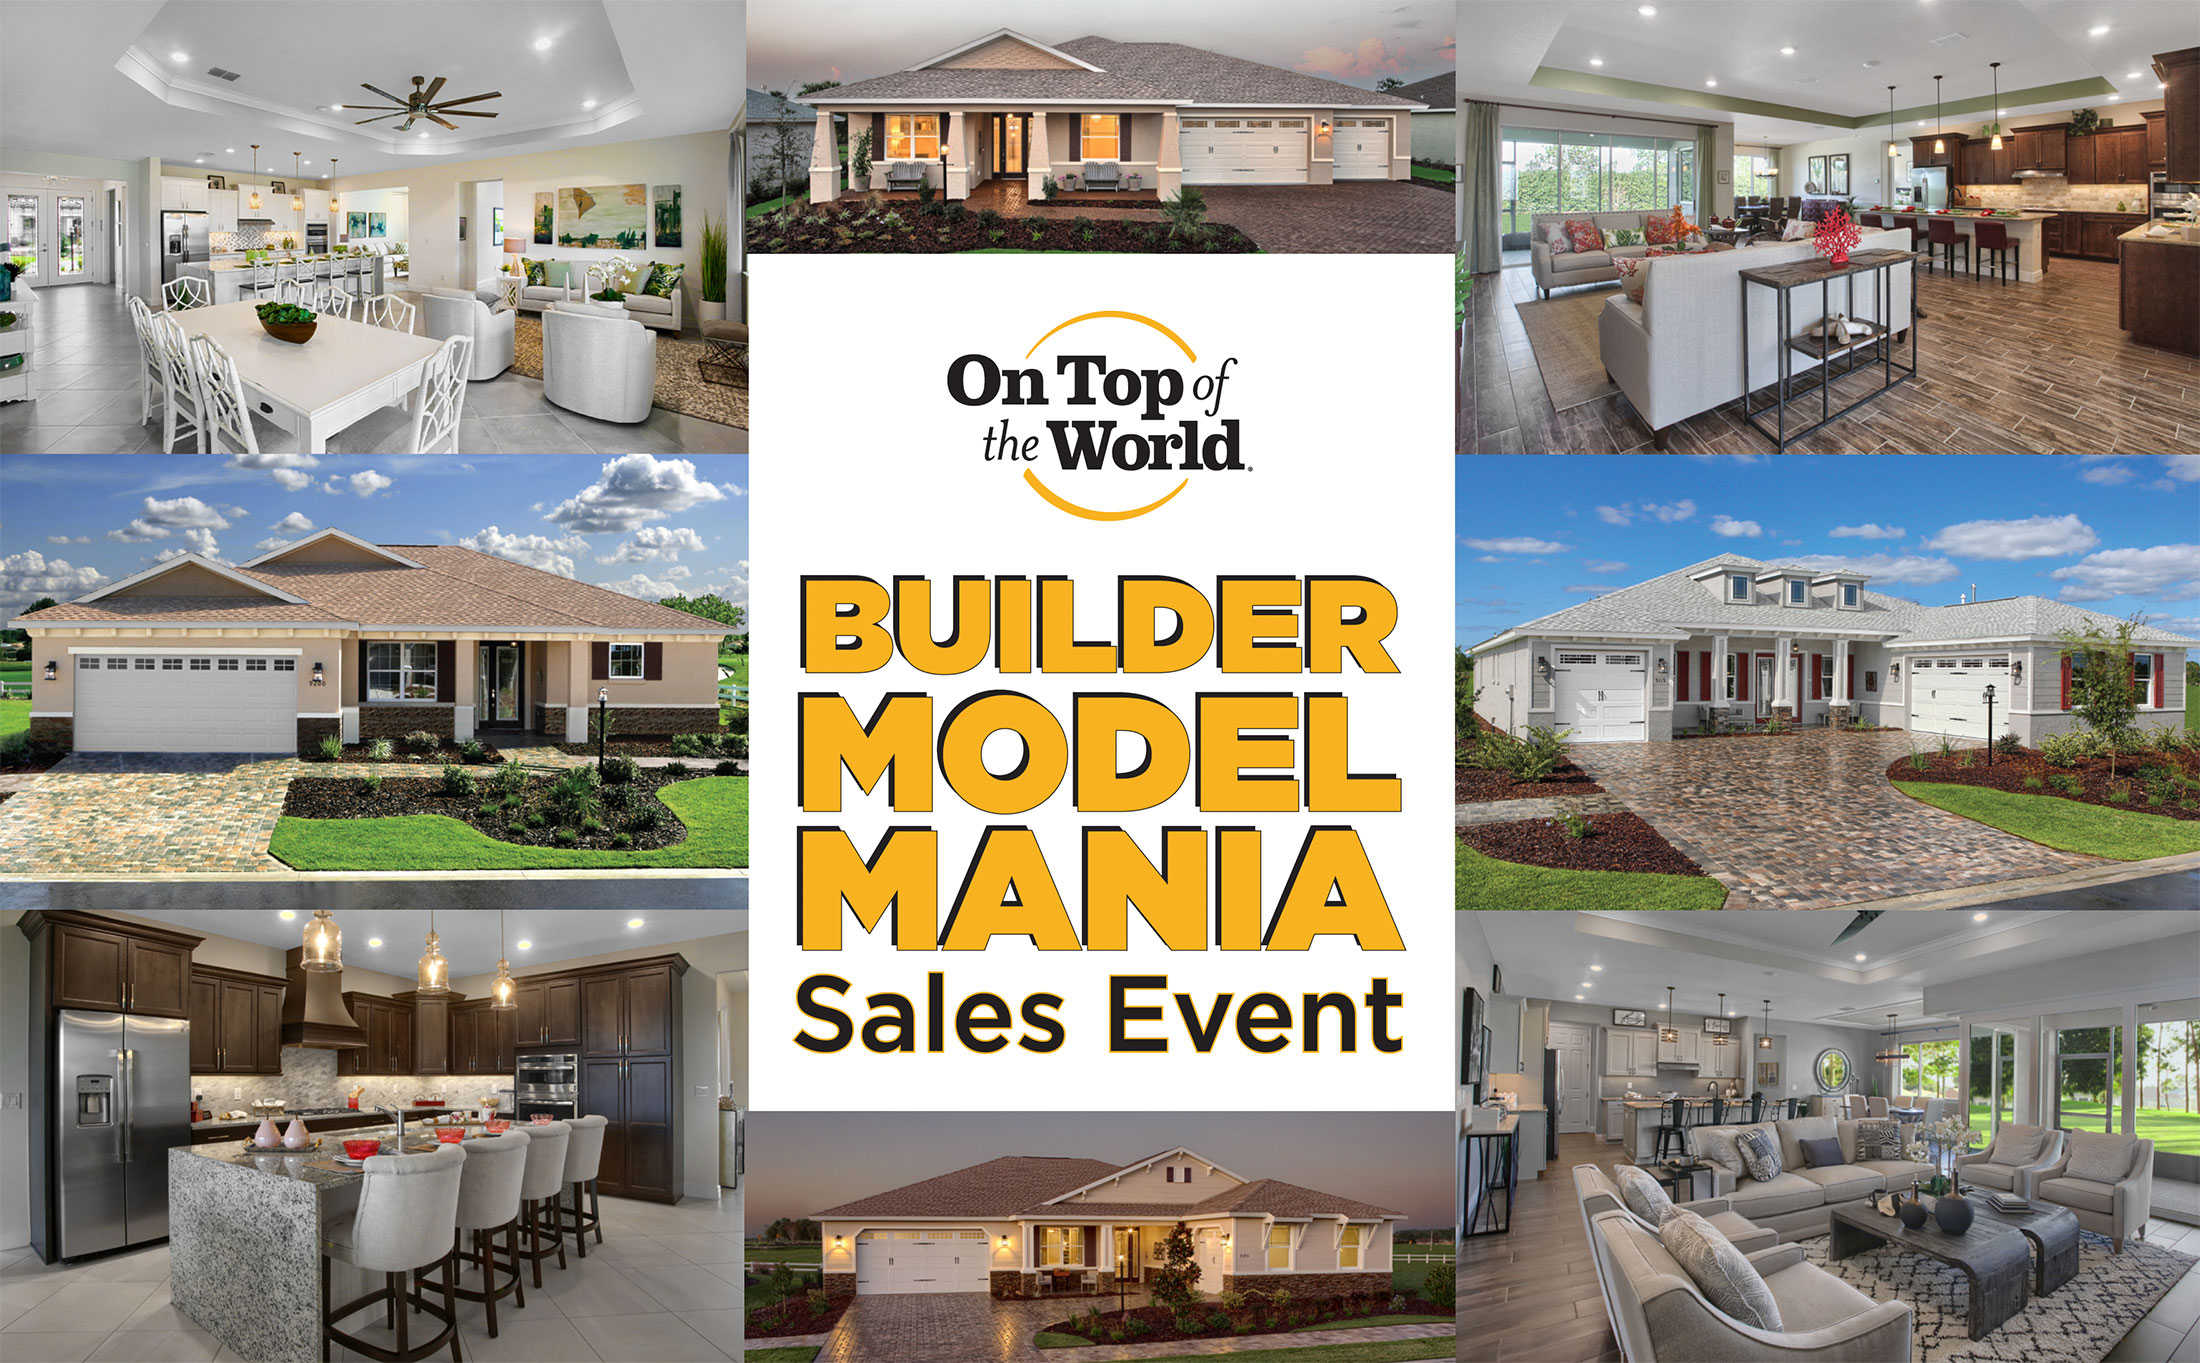 Builder Model Mania at On Top of the World